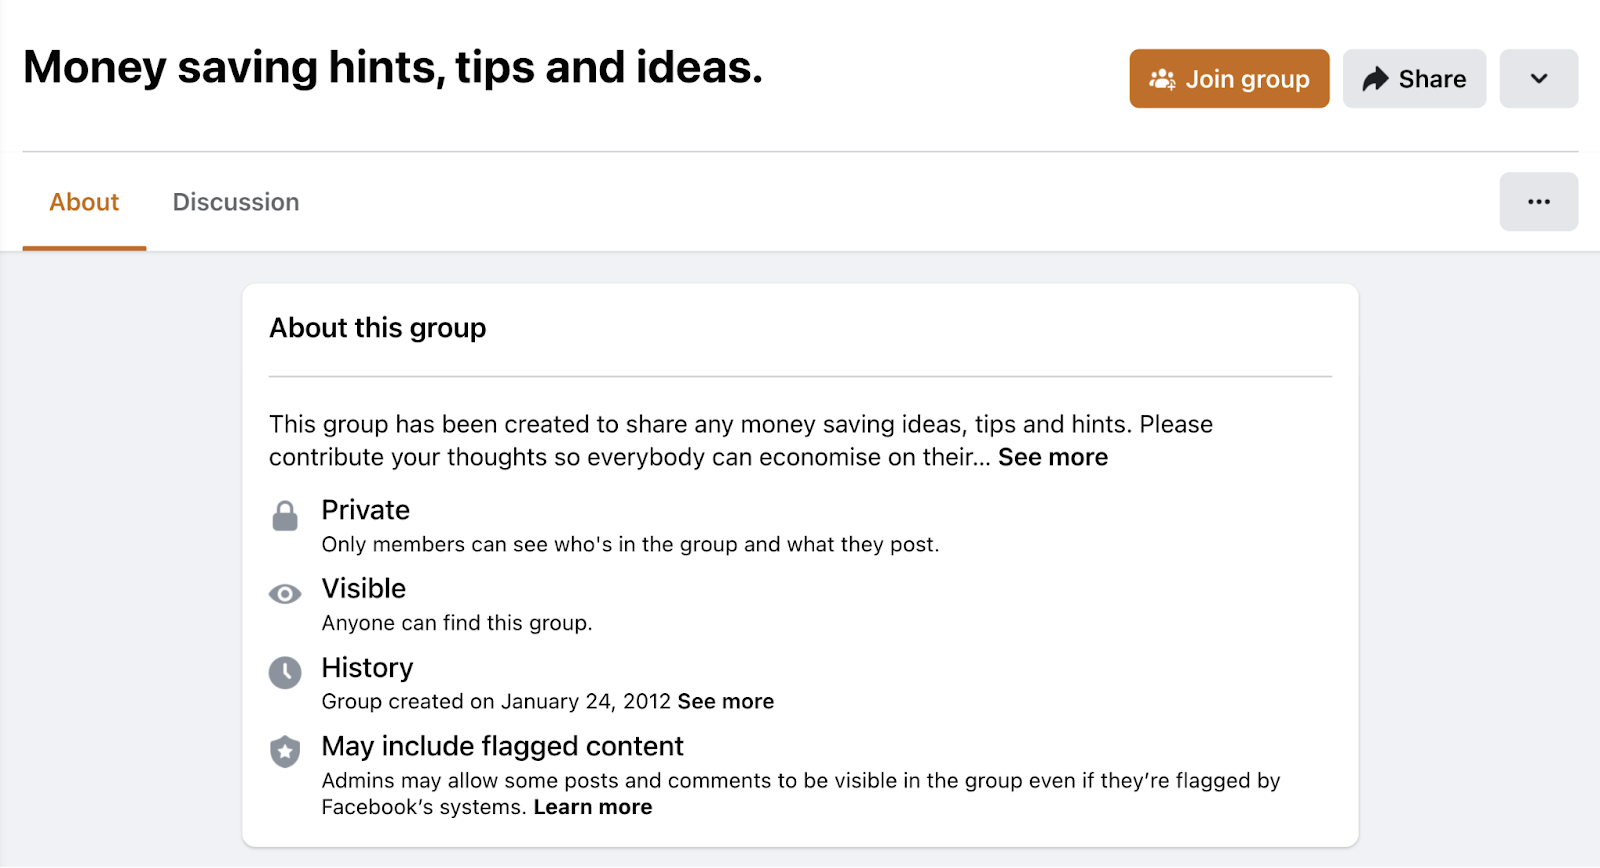 "Money redeeming  hints, tips and ideas" Facebook group